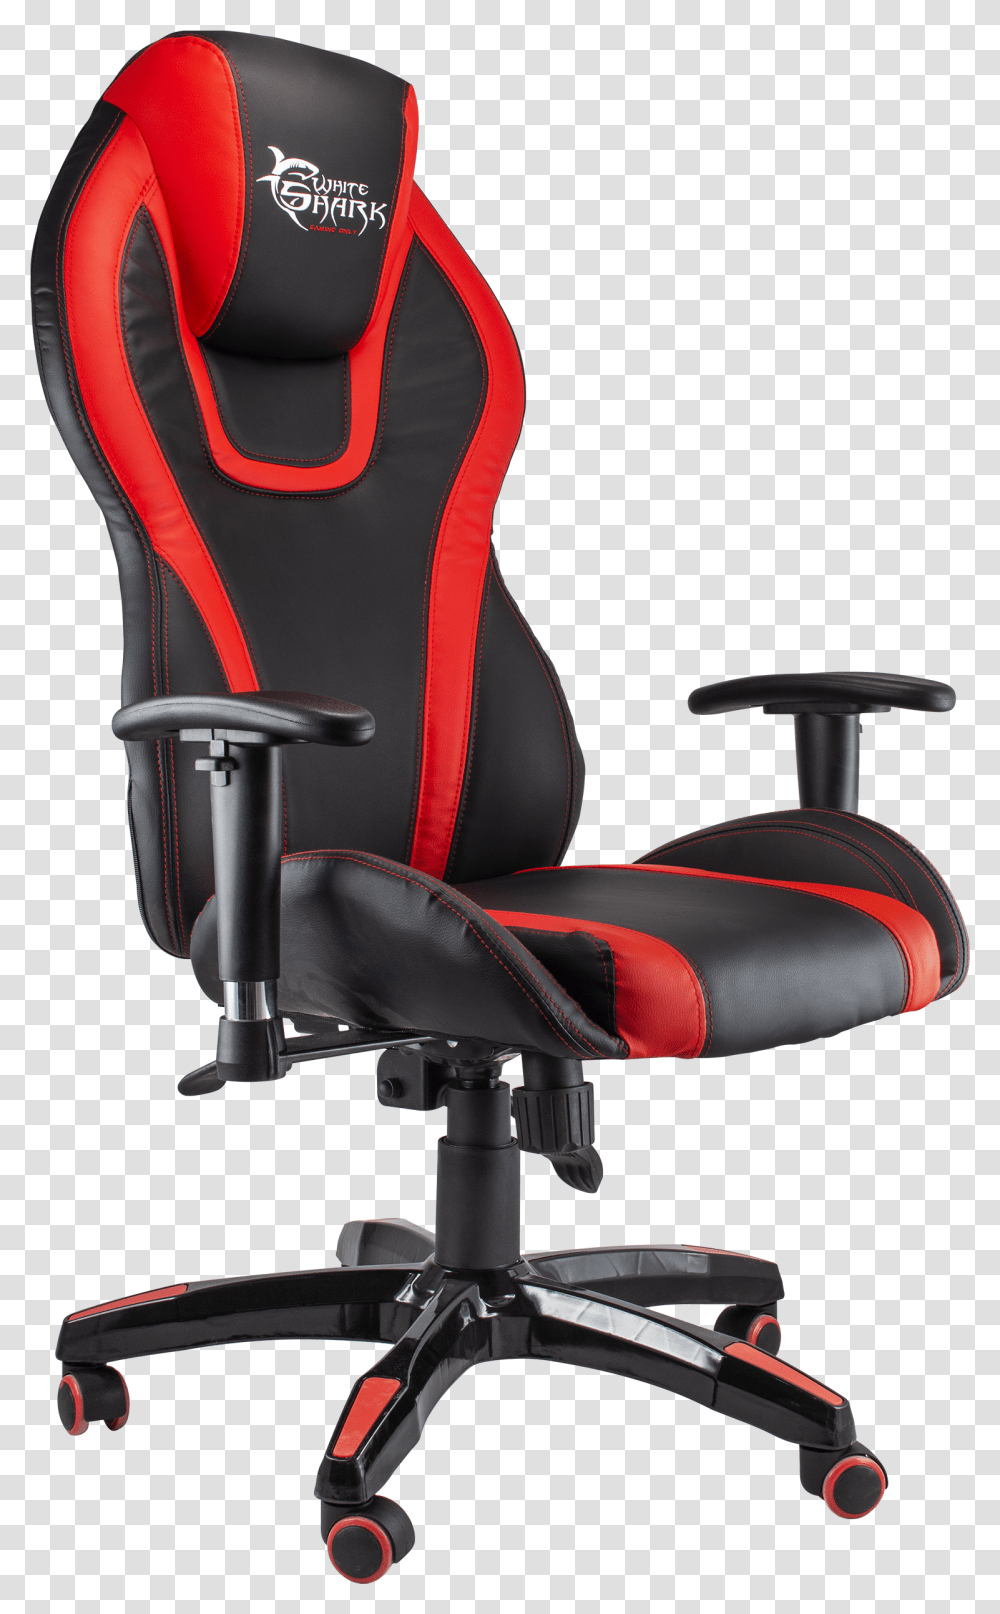 White Shark Gaming Chair Cobra Blackred, Cushion, Furniture, Headrest, Bicycle Transparent Png